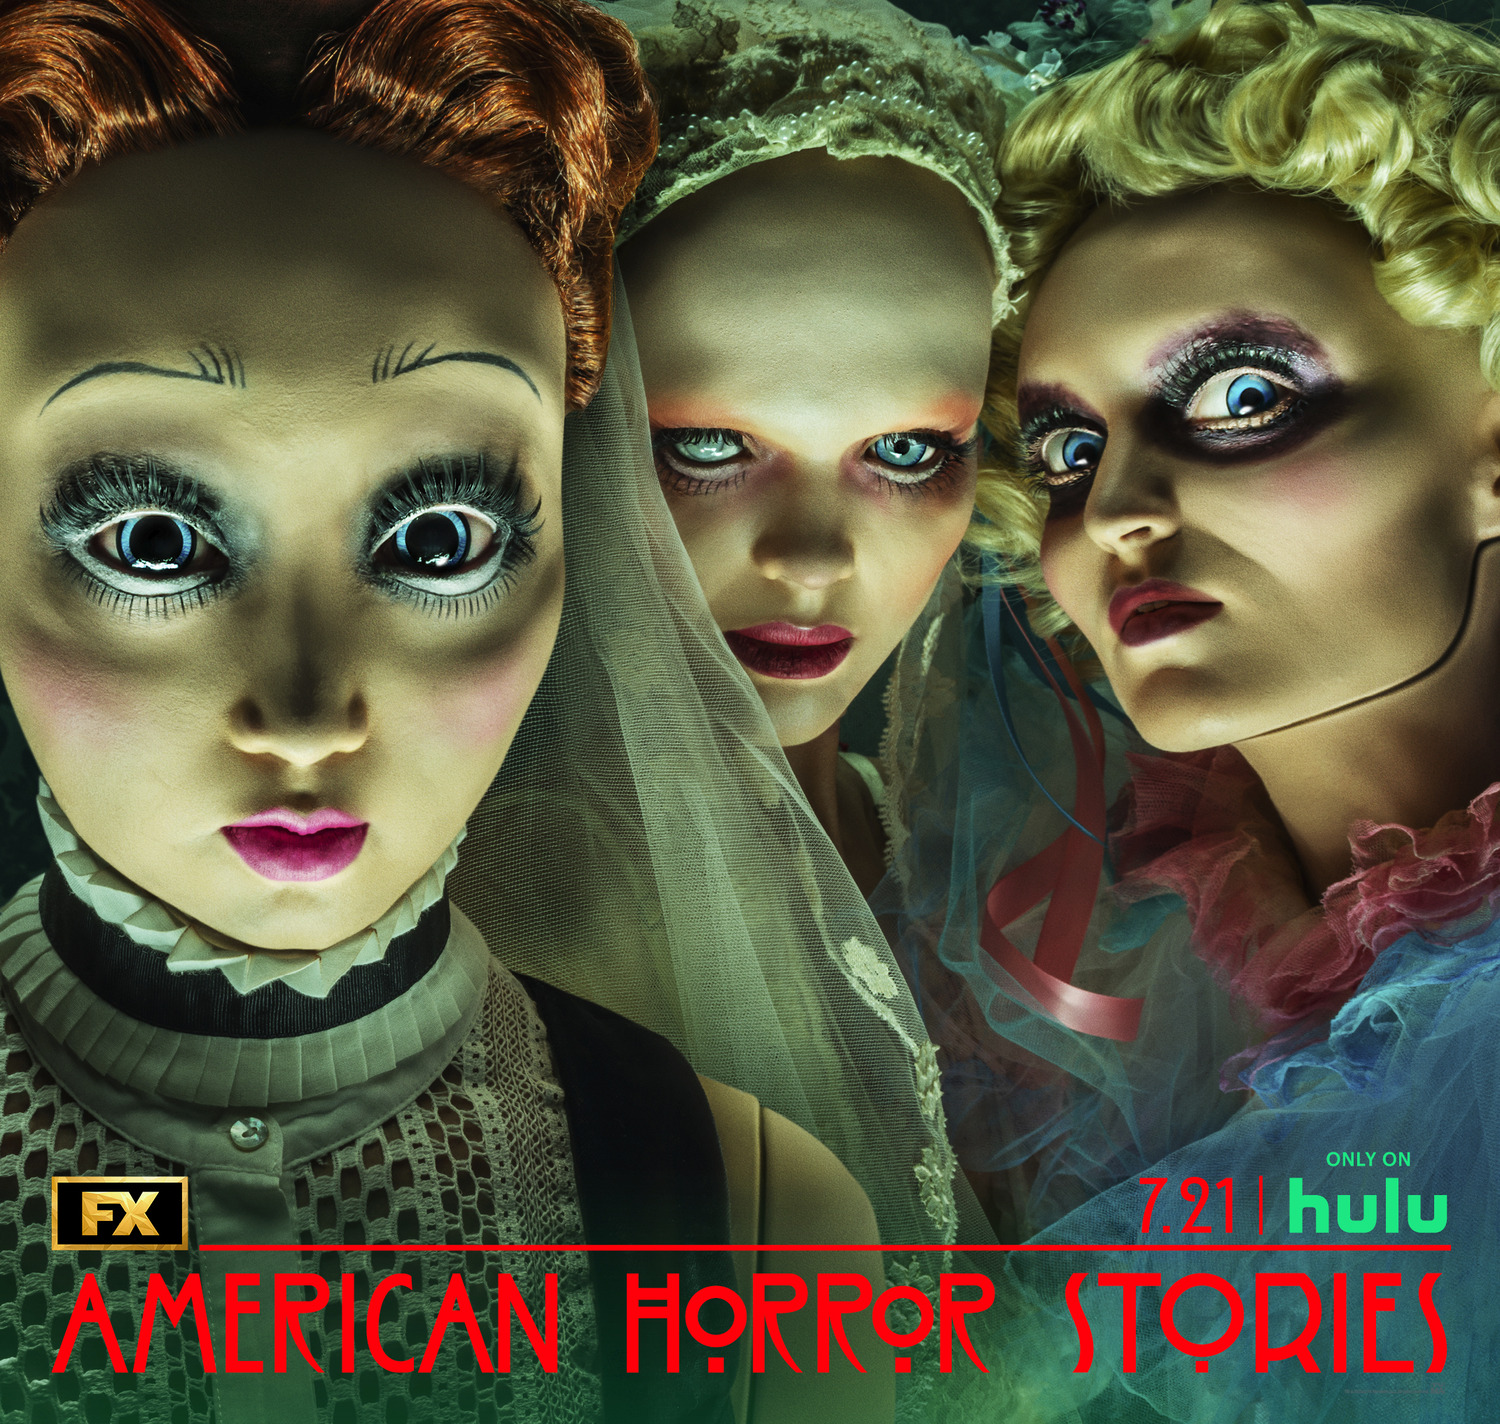 Extra Large TV Poster Image for American Horror Stories (#12 of 24)